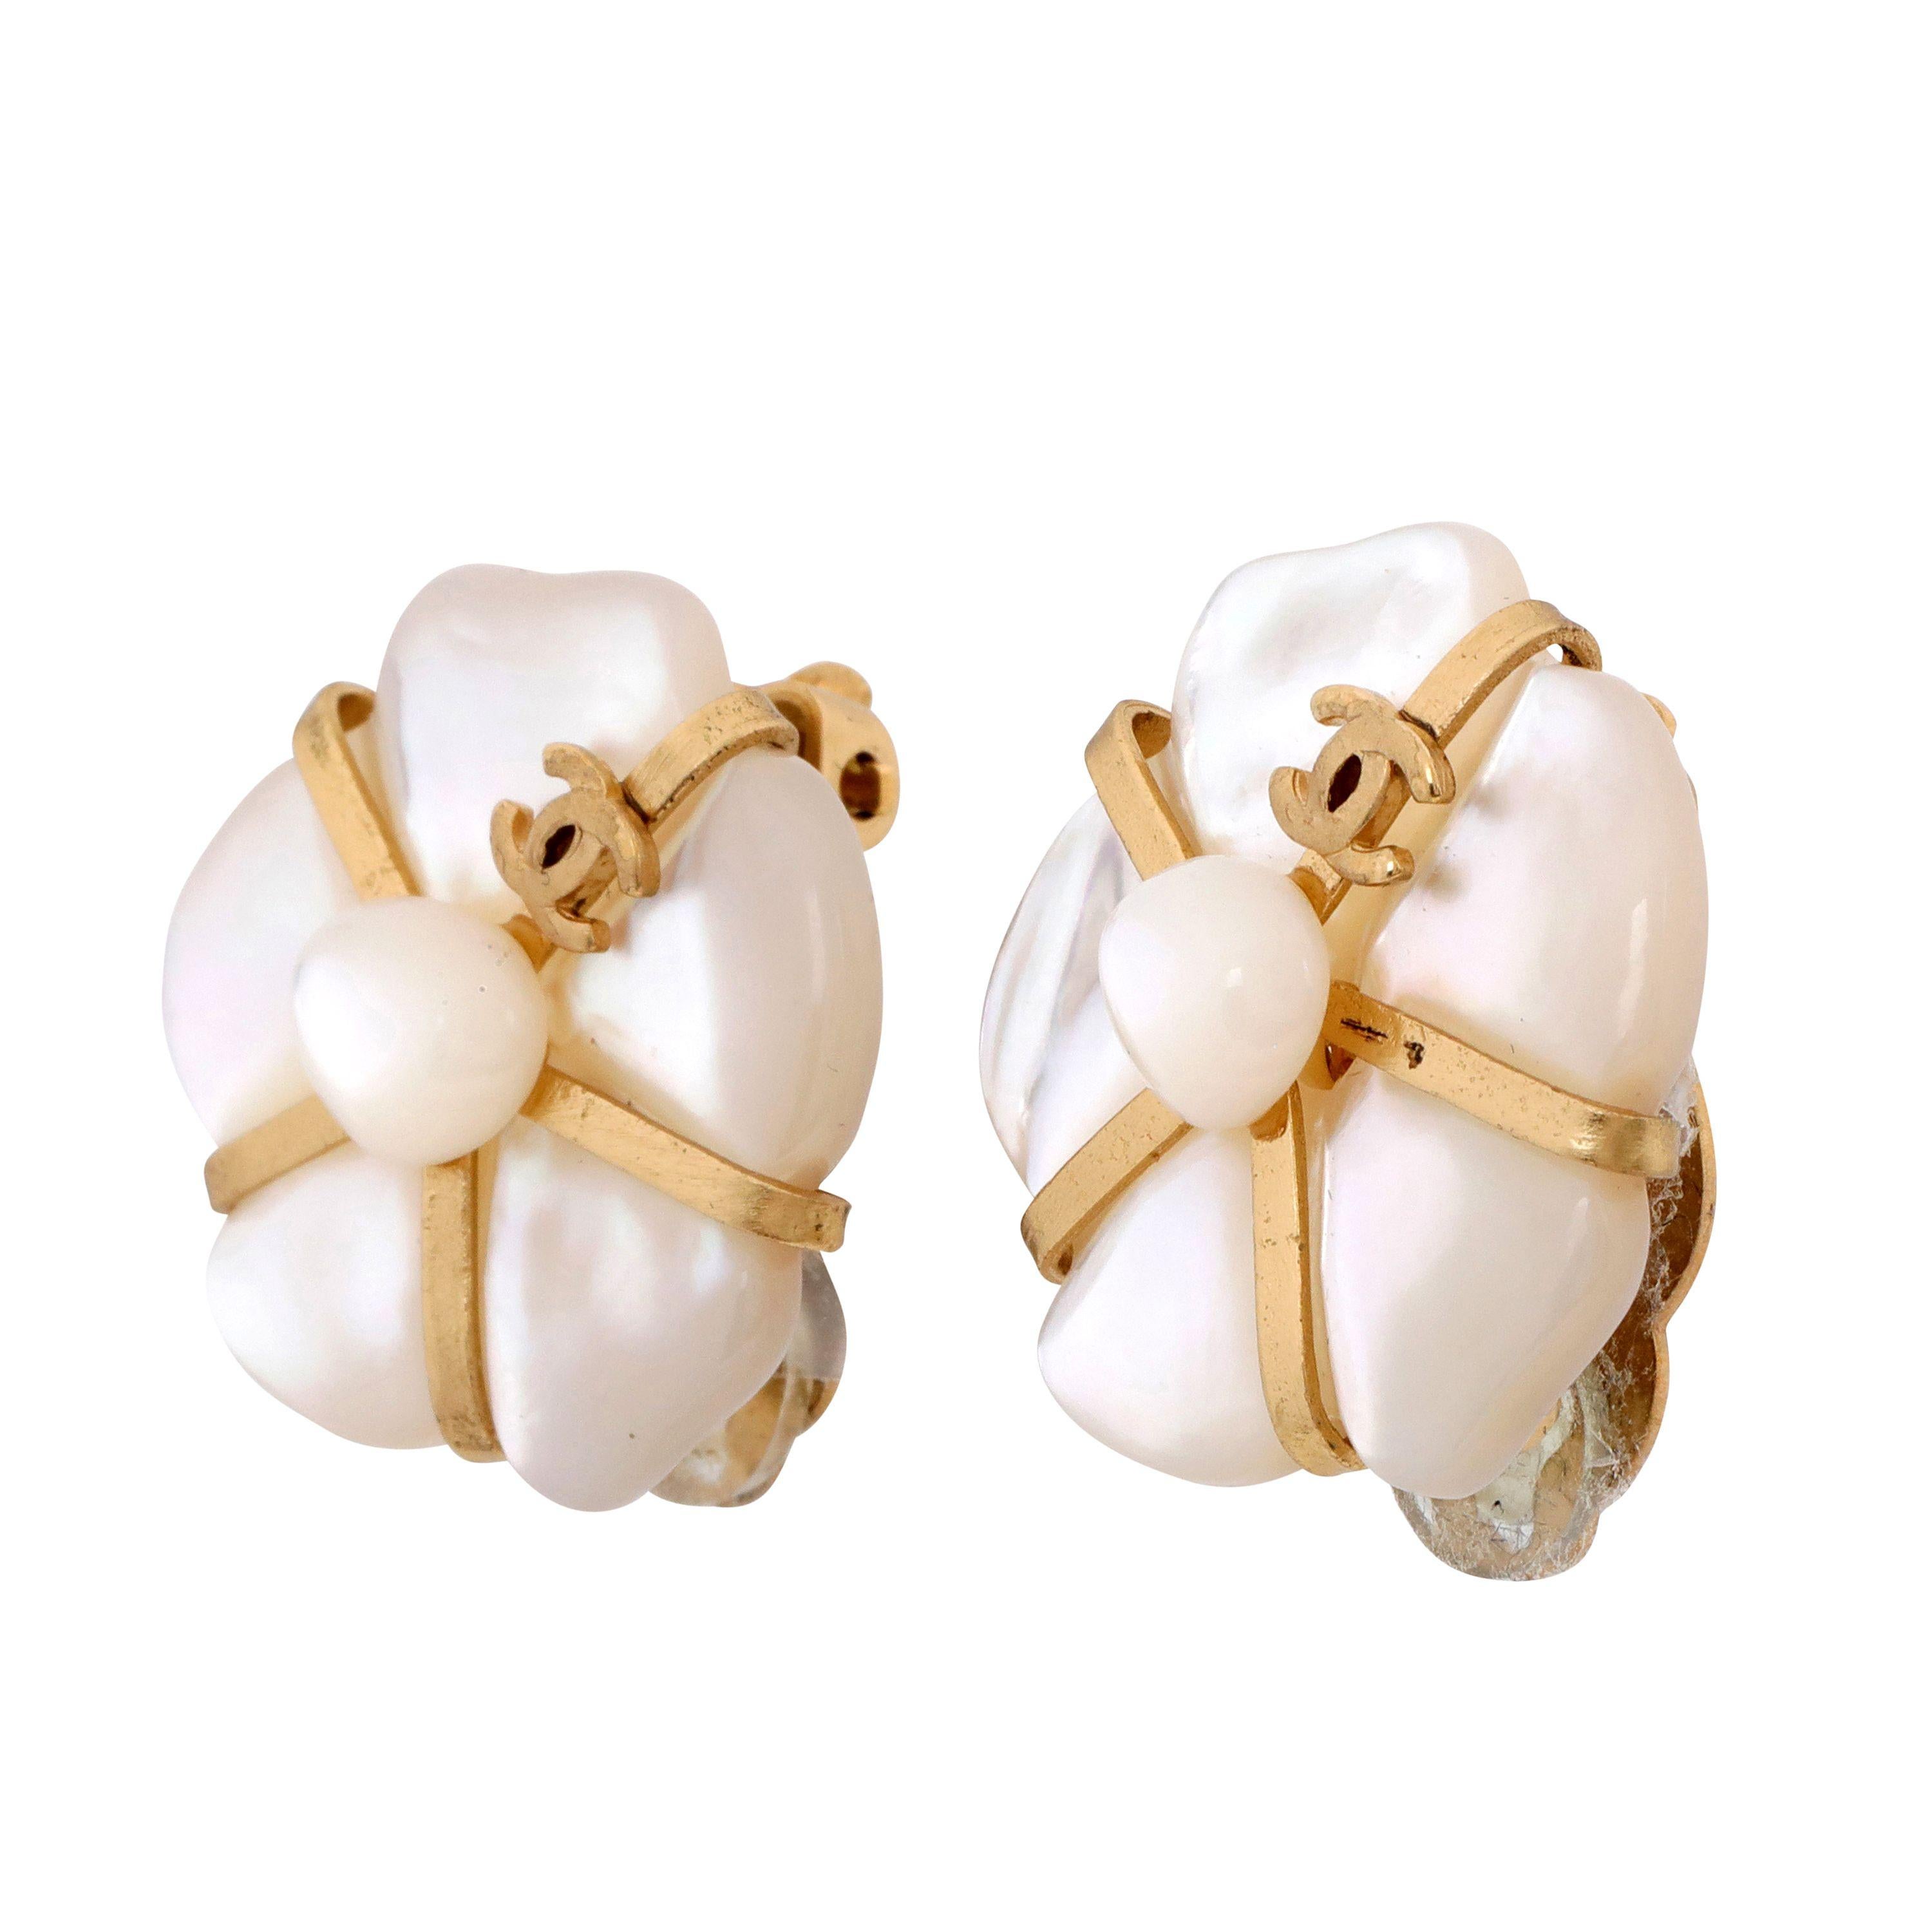 These authentic Chanel Mother of Pearl Camellia Earrings are pristine from the 2001 Fine Jewelry collection.  Abstract mother of pearl camellia flower center with gold. Clip on style.     Pouch or box included. 
PBF 13795
